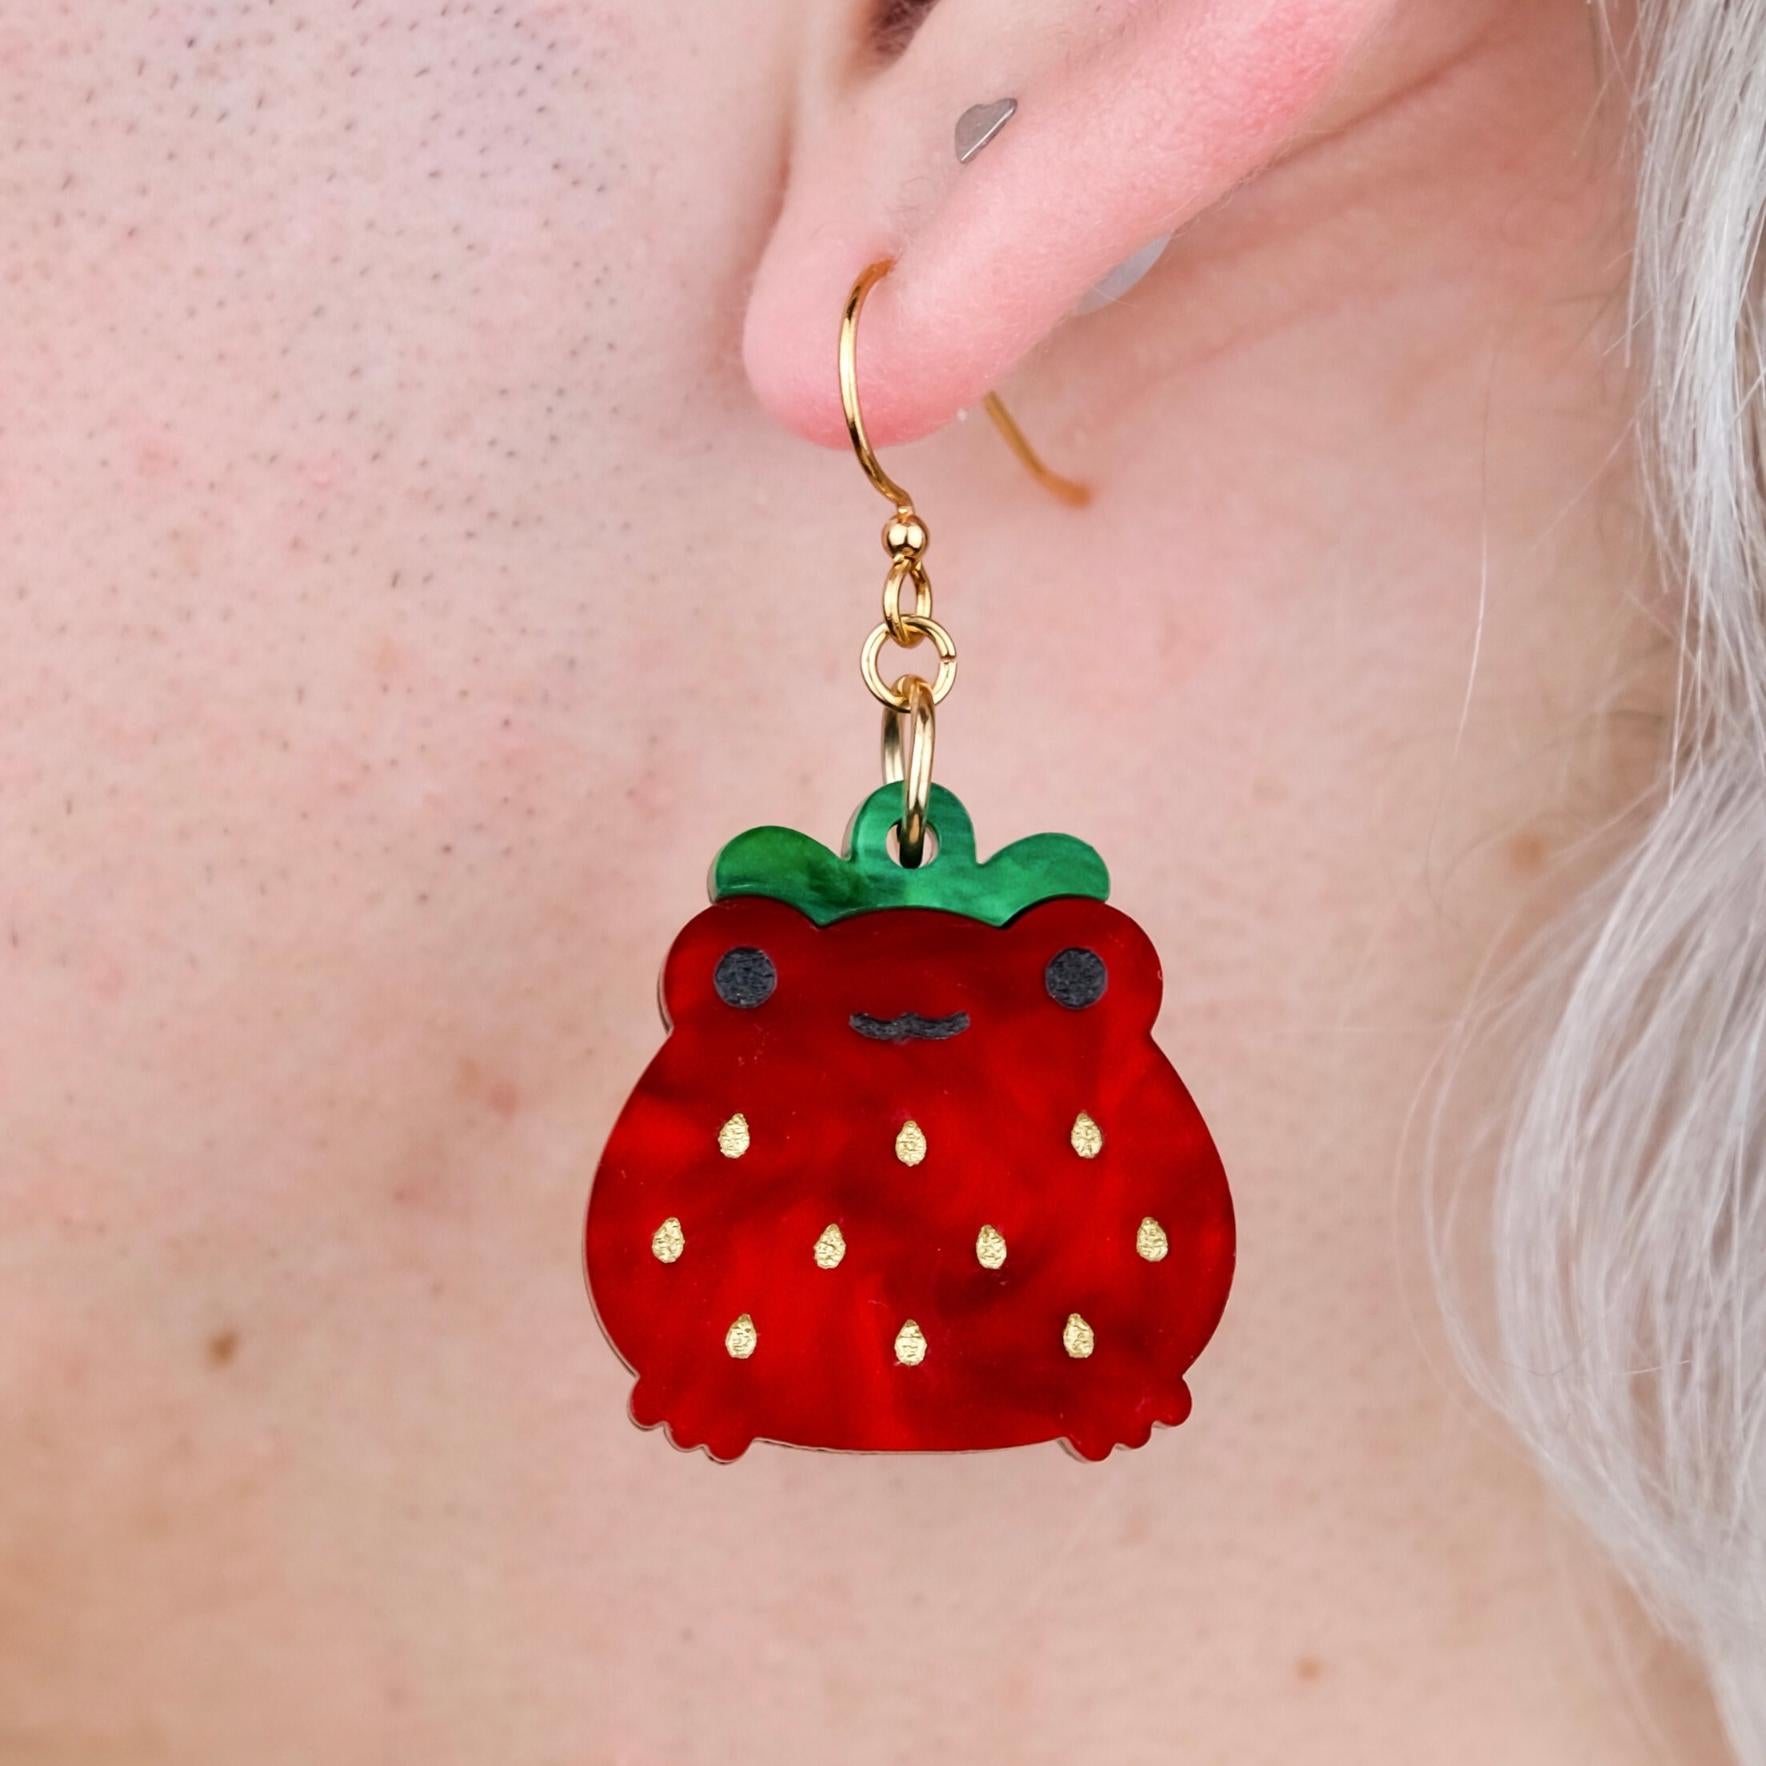 Strawberry Frog Squishmallow Earrings Polymer Clay Jewelry Handmade  Statement Earrings Cottagecore Kawaii 